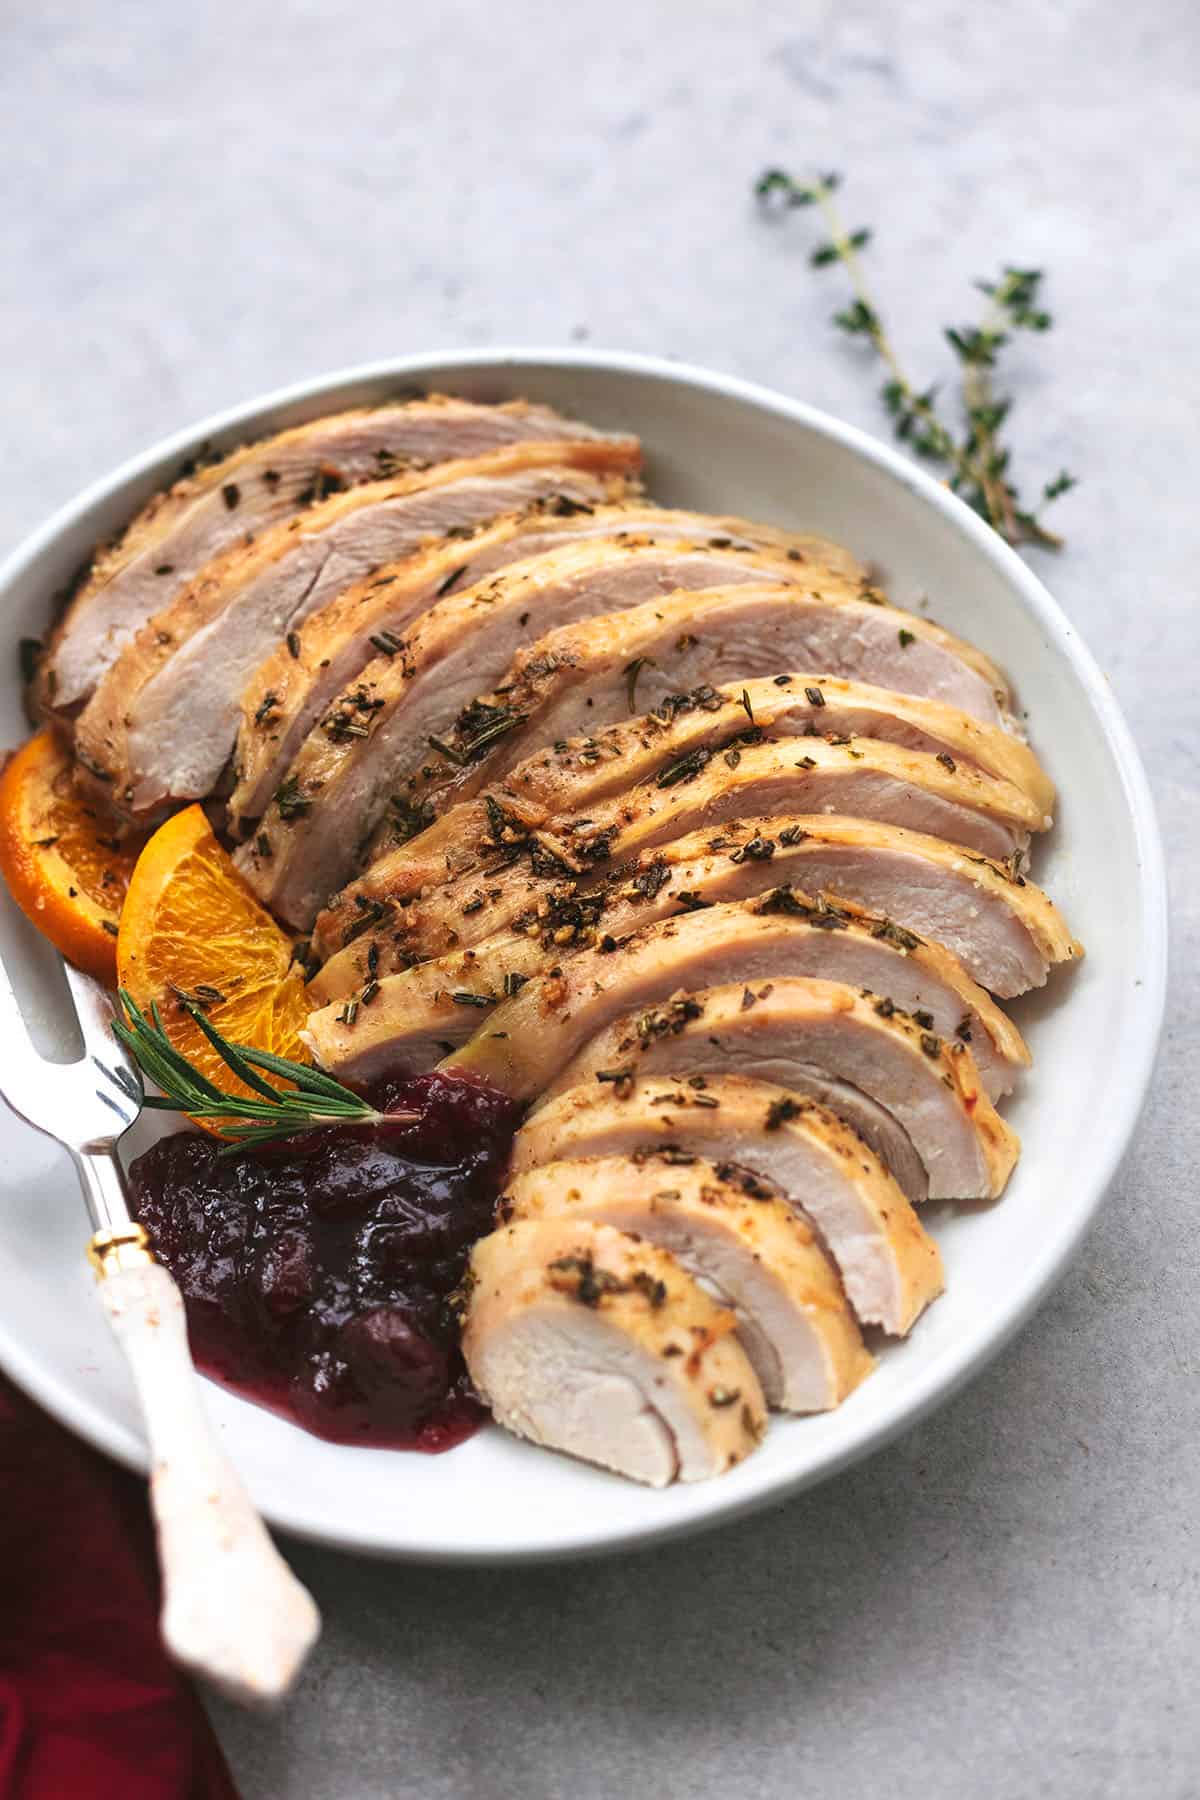 sliced turkey breast with cranberry sauce on plate